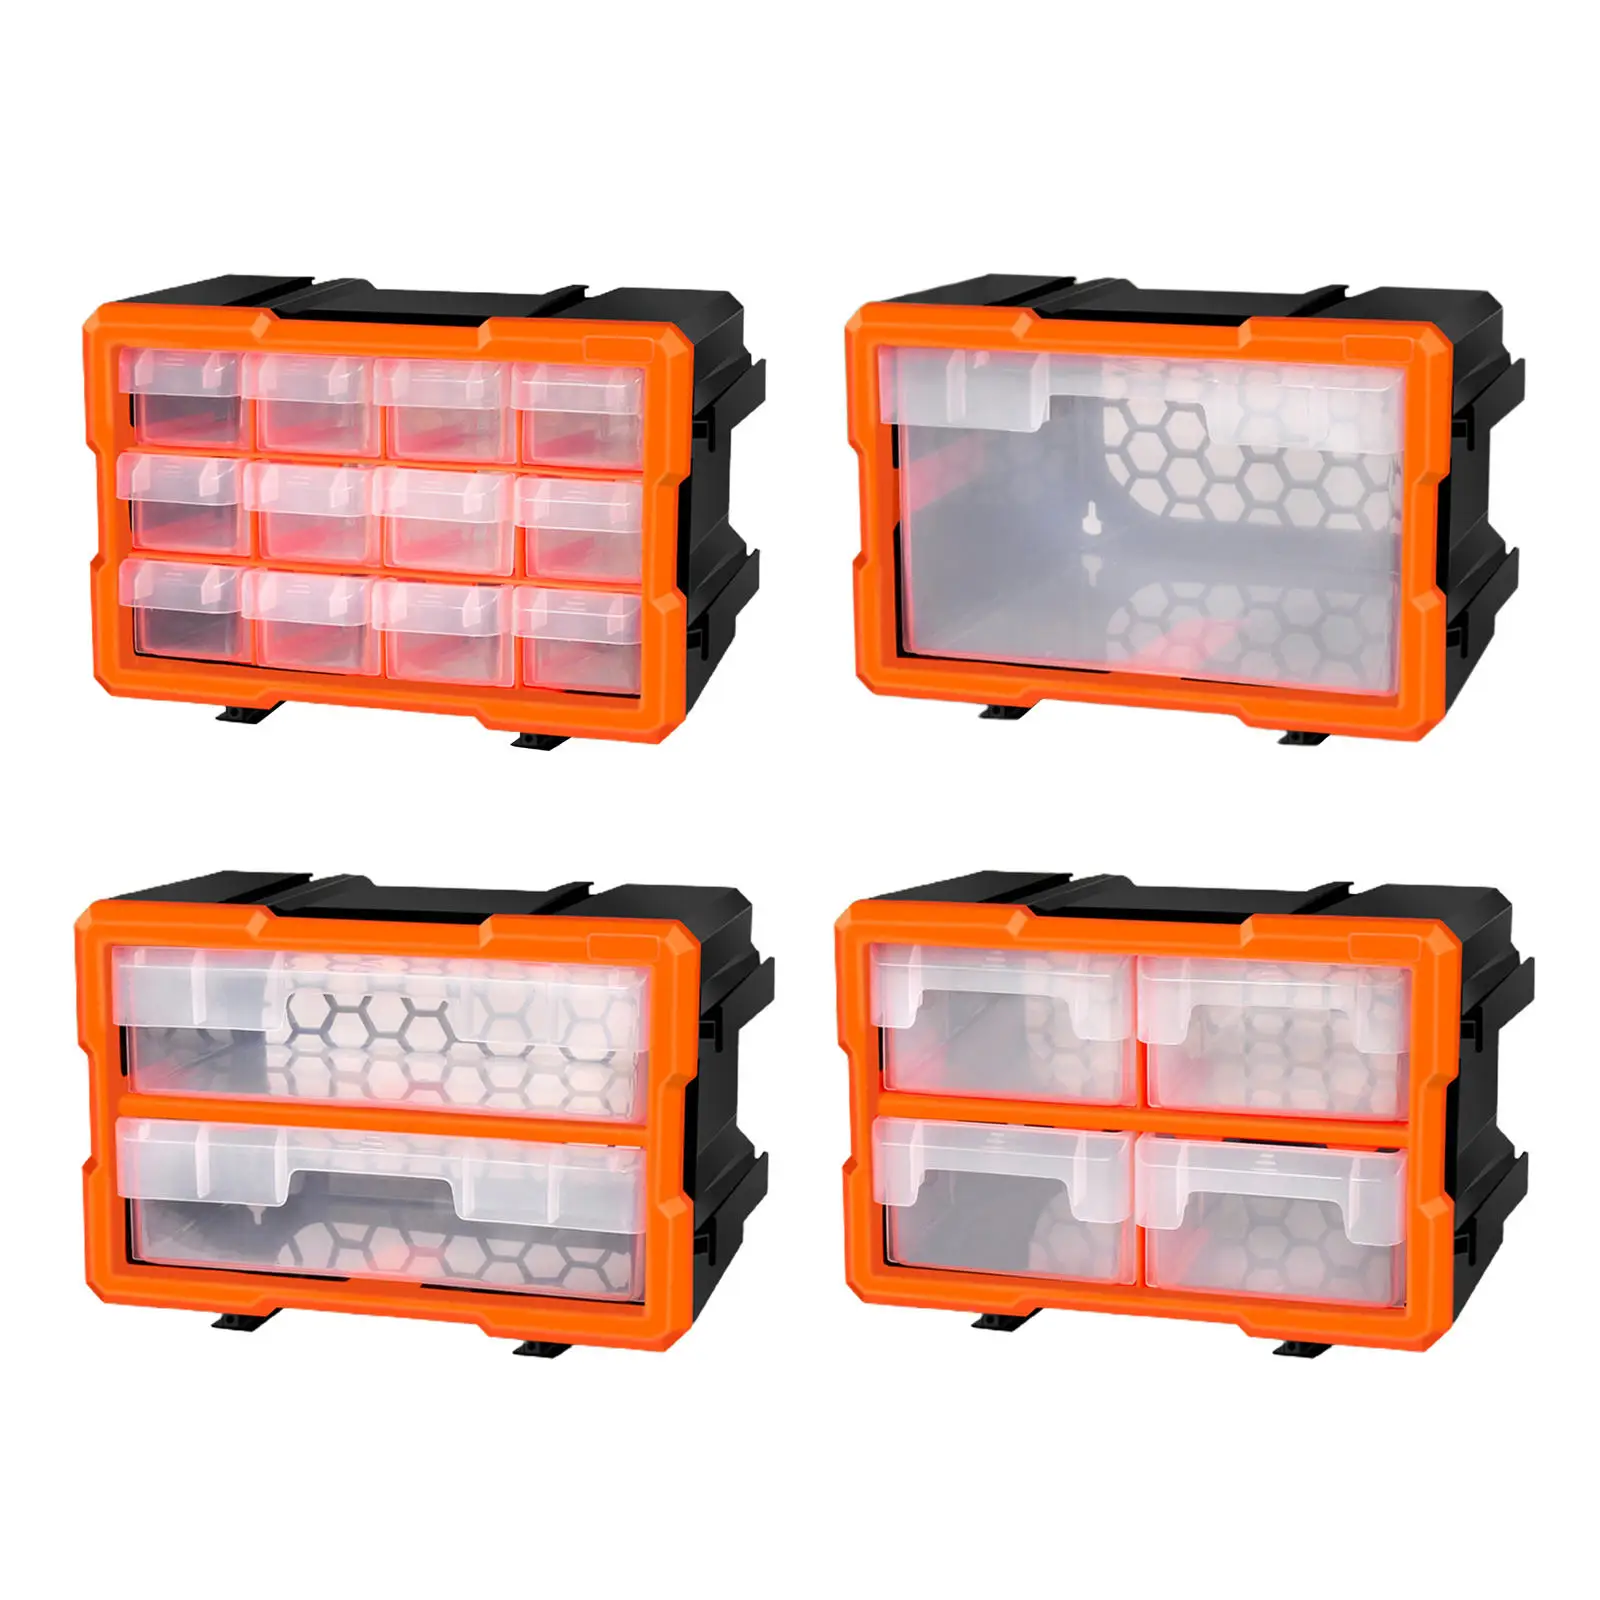 Hardware Box Storage Box Durable Plastic in a Slim Design with Compartments Excellent for Screws Nuts and Bolts